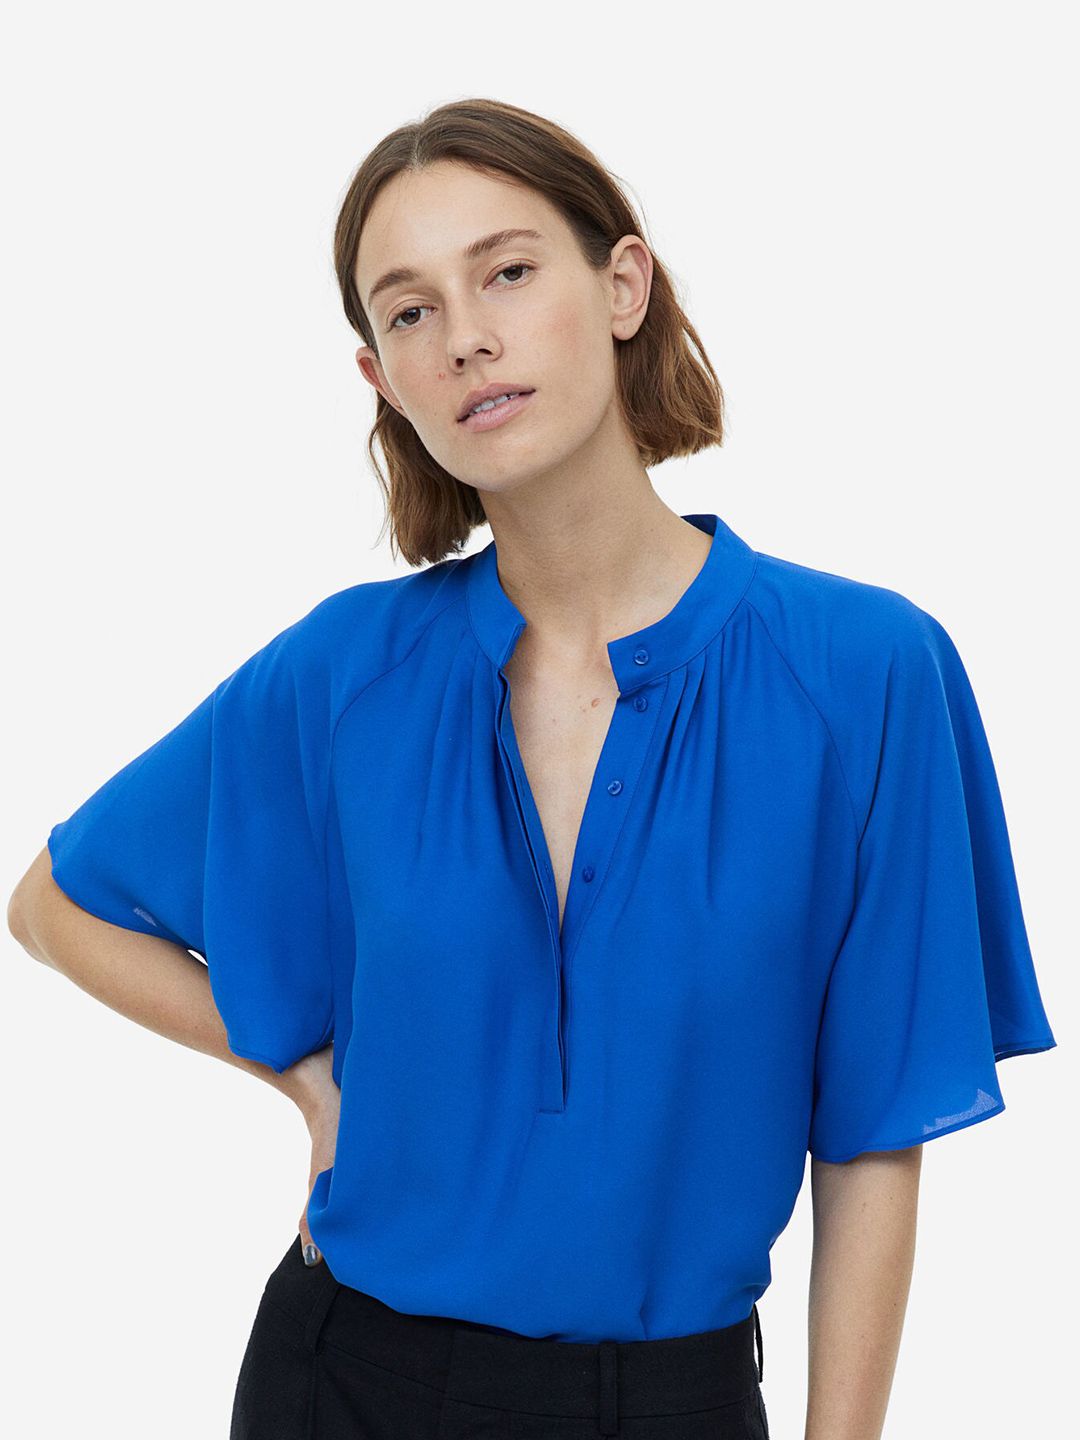 H&M Chiffon Blouse Price in India